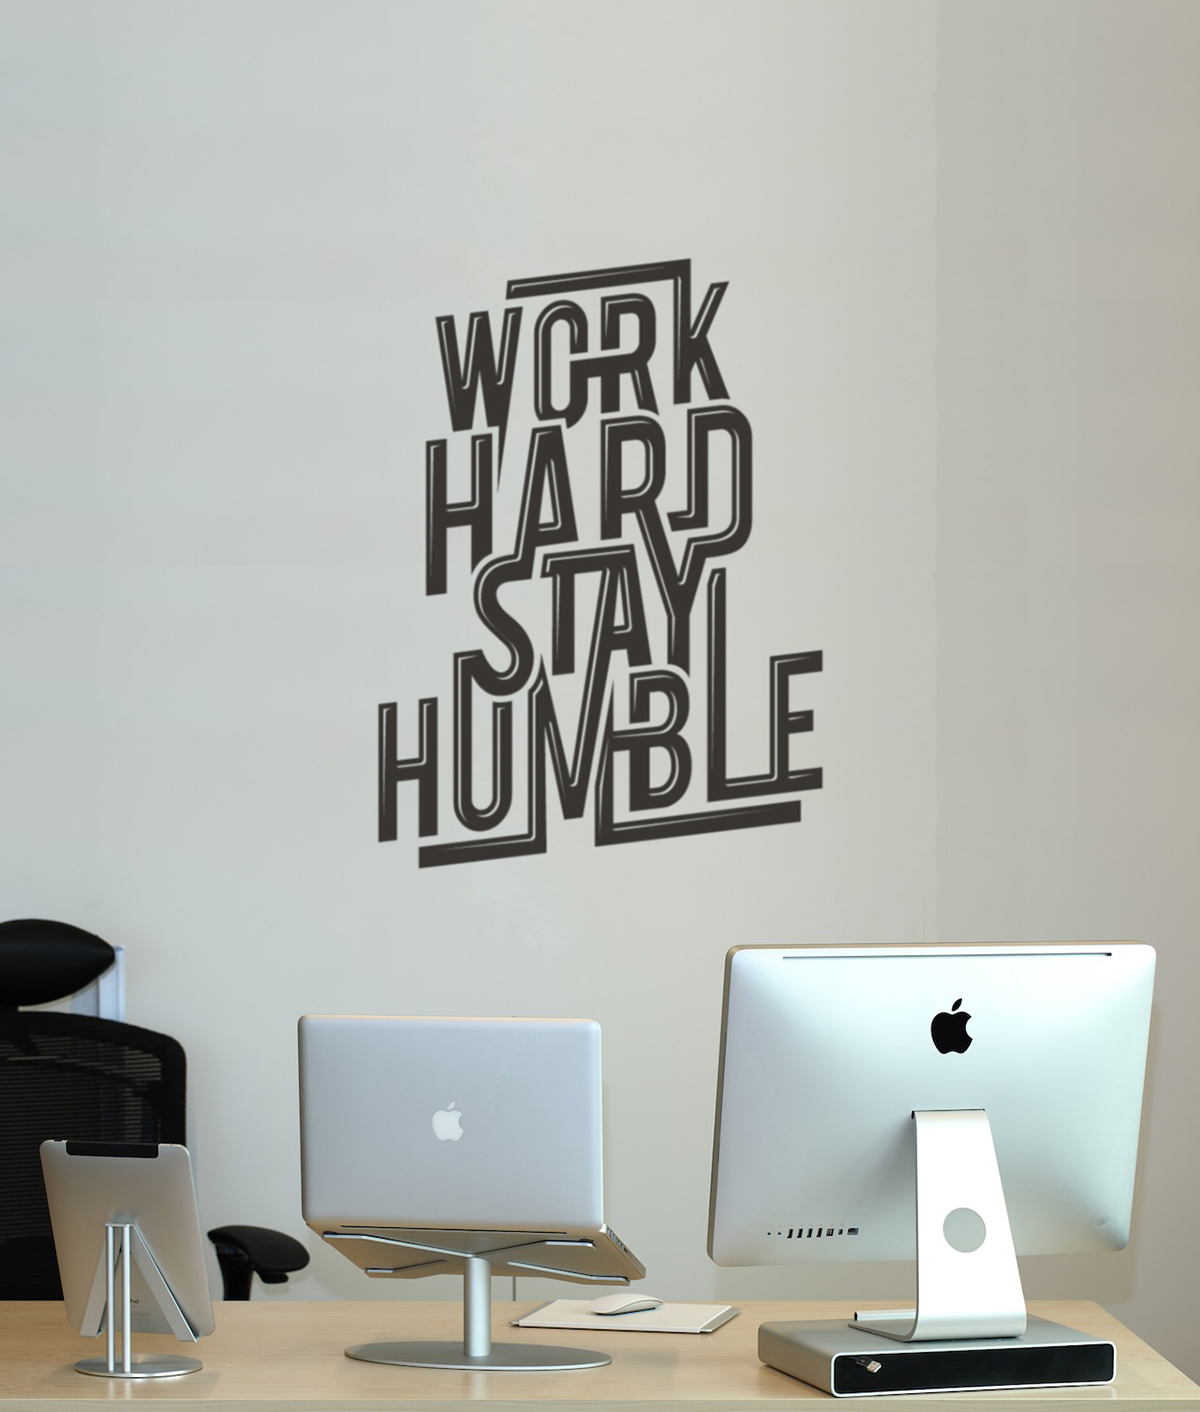 wall sticker  typography letters wall sticker phrase saying font new London UK design designed work hard stay humble vinyl impression edward currer black gym dream motto quote